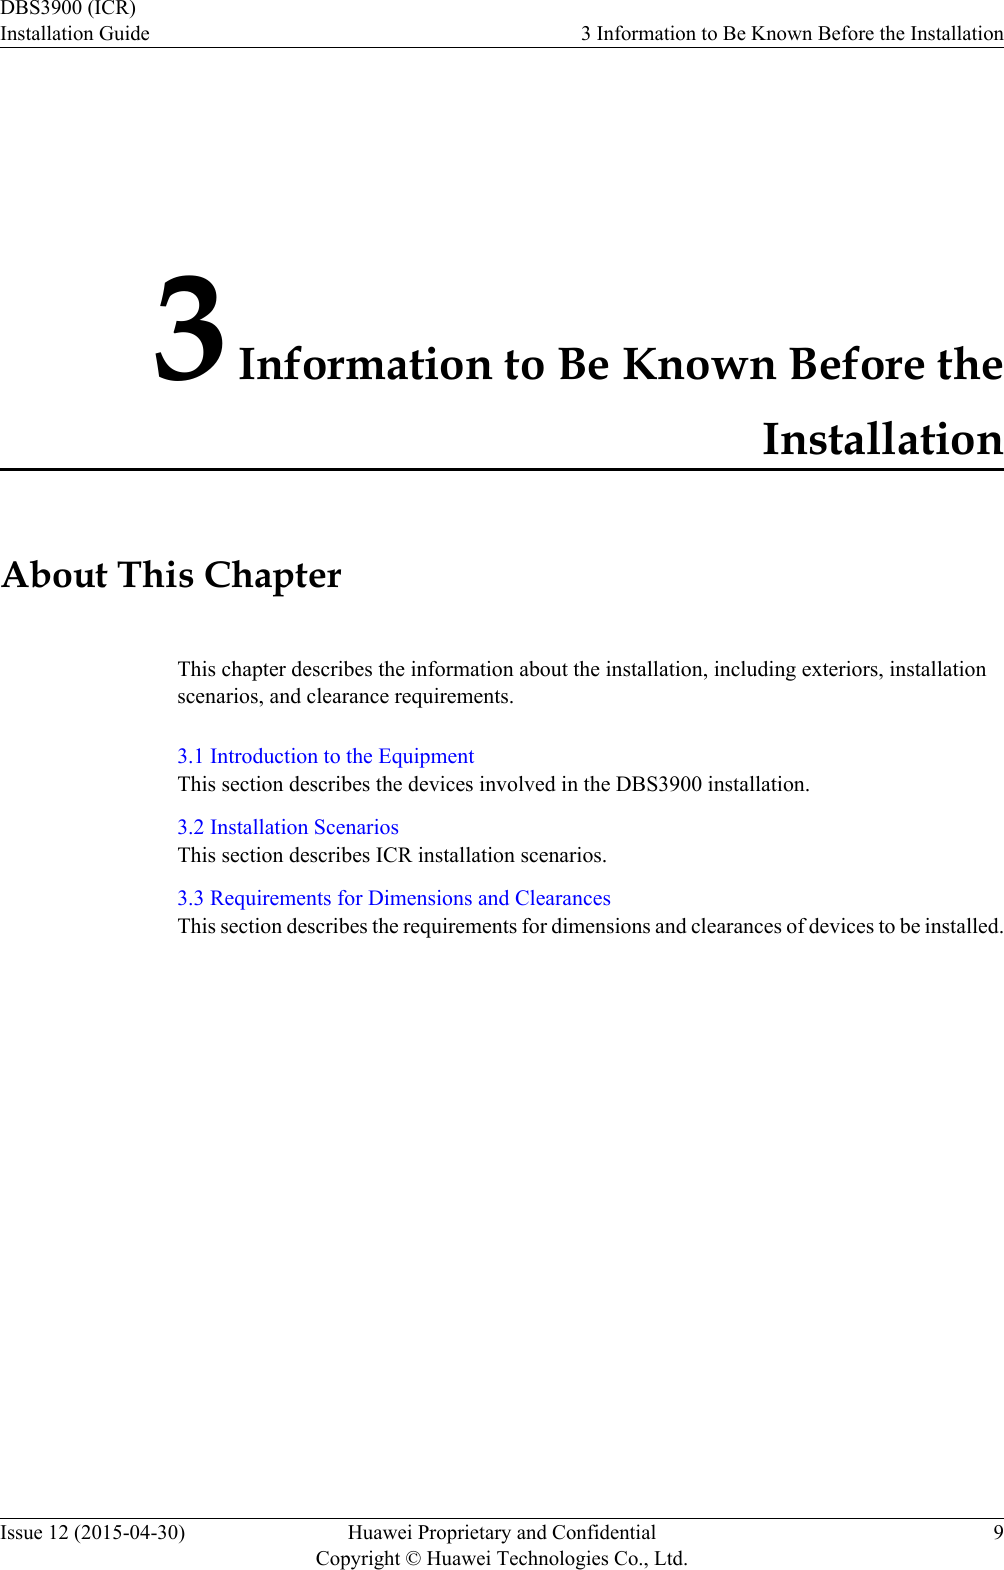 3 Information to Be Known Before theInstallationAbout This ChapterThis chapter describes the information about the installation, including exteriors, installationscenarios, and clearance requirements.3.1 Introduction to the EquipmentThis section describes the devices involved in the DBS3900 installation.3.2 Installation ScenariosThis section describes ICR installation scenarios.3.3 Requirements for Dimensions and ClearancesThis section describes the requirements for dimensions and clearances of devices to be installed.DBS3900 (ICR)Installation Guide 3 Information to Be Known Before the InstallationIssue 12 (2015-04-30) Huawei Proprietary and ConfidentialCopyright © Huawei Technologies Co., Ltd.9